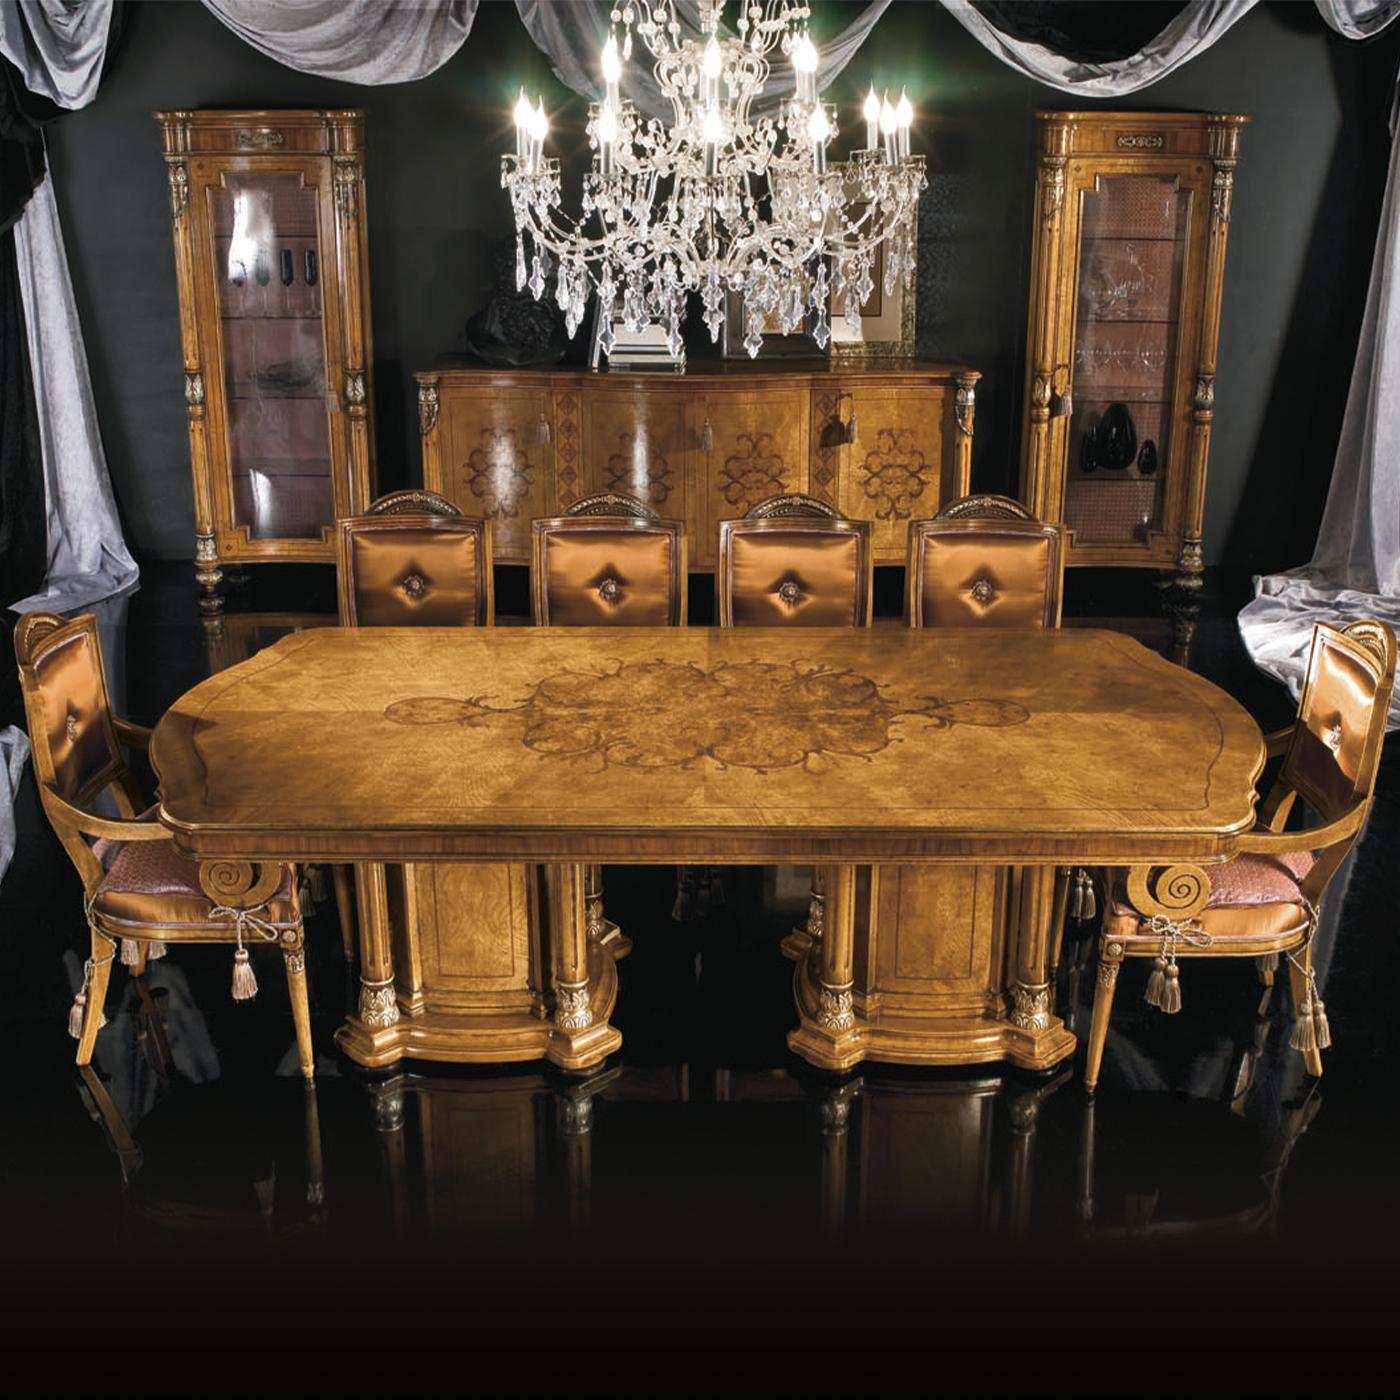 A showcase of deft craftsmanship paired with the charm of feathered ash wood, walnut briar, and rosewood defines the opulent personality of this dining table. The imposing top, richly decorated with fancy and distinctive marquetries, features smooth